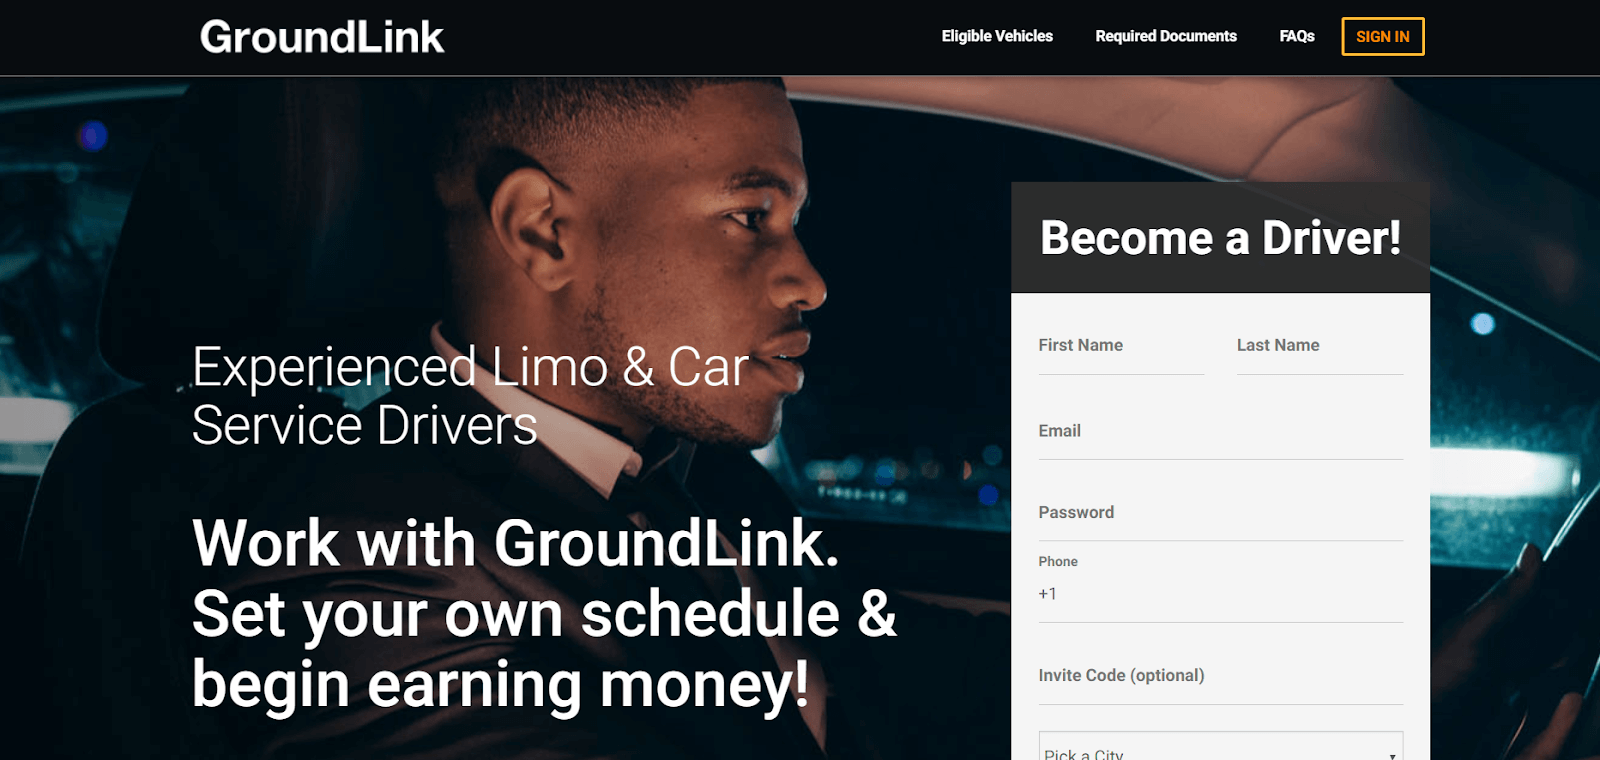 Become a Driver page on GroundLink